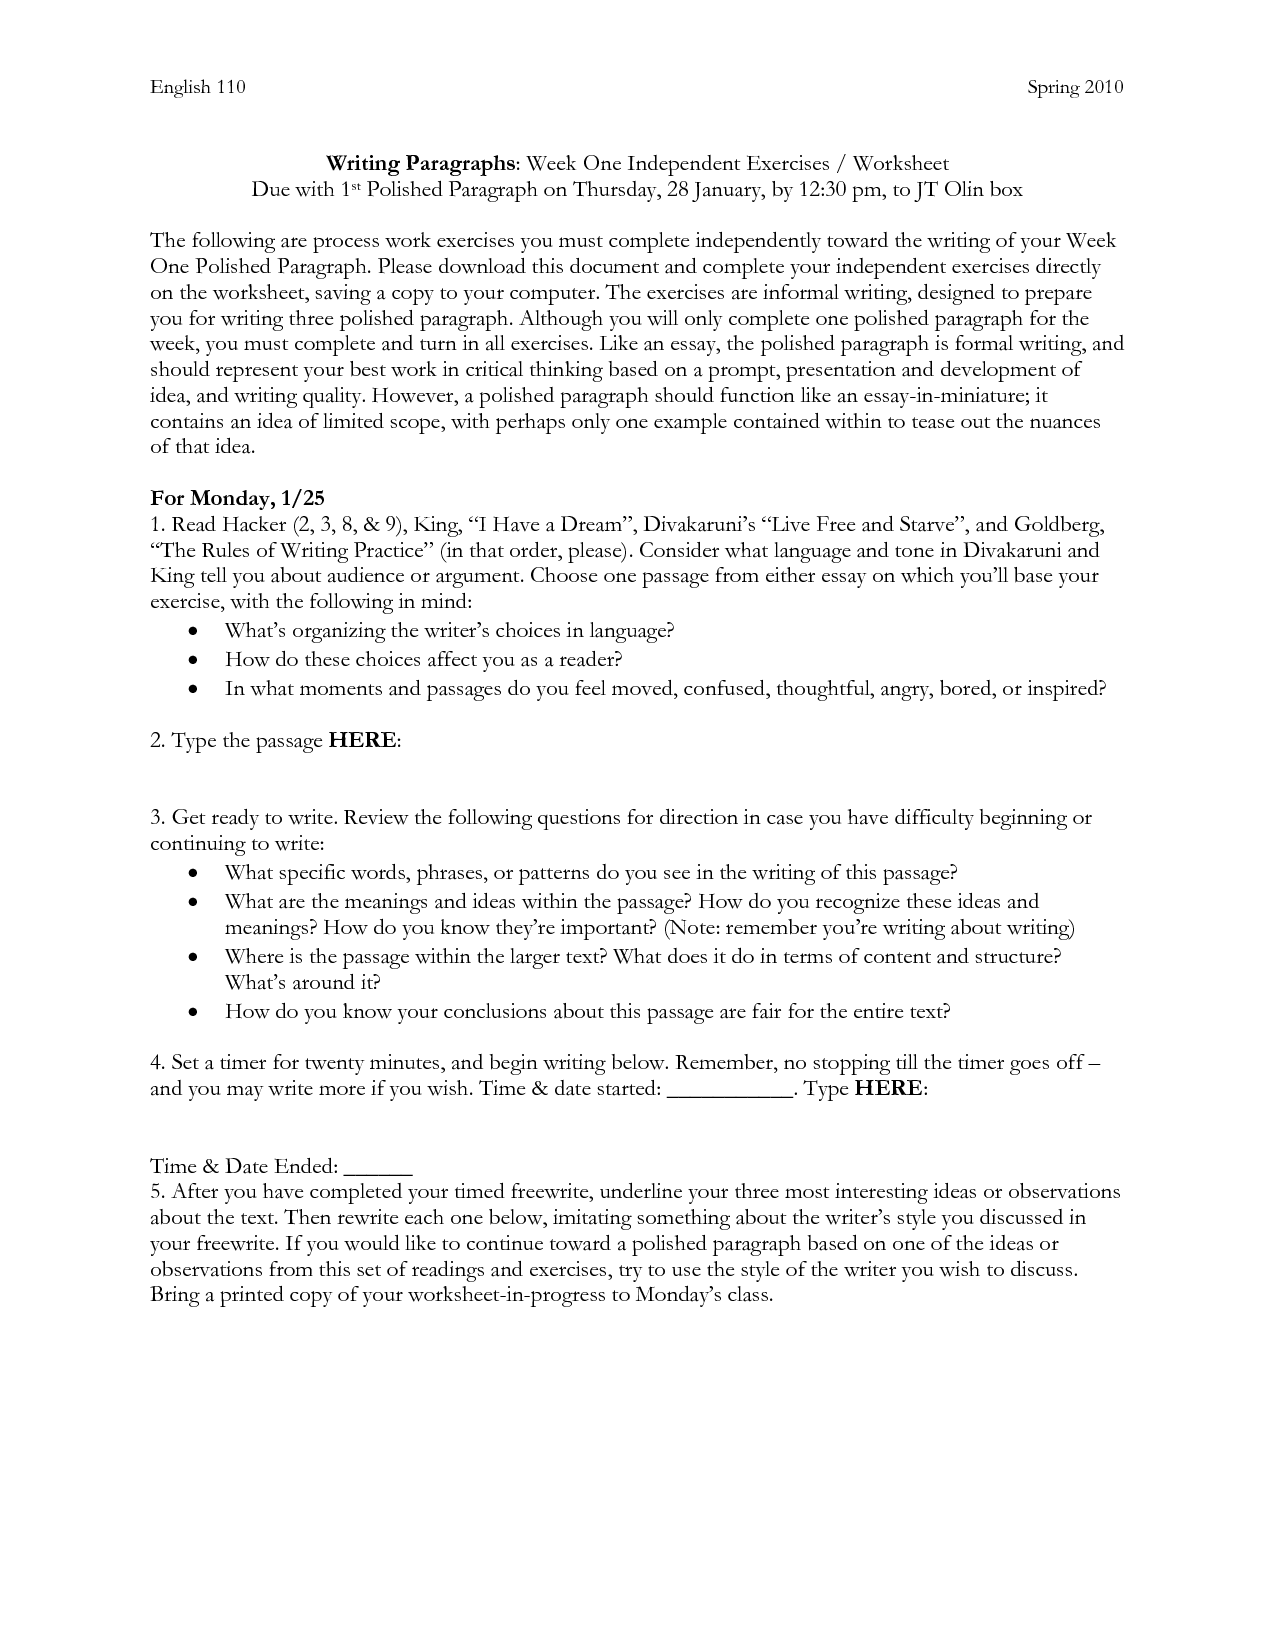 13-best-images-of-paragraph-writing-worksheets-paragraph-writing